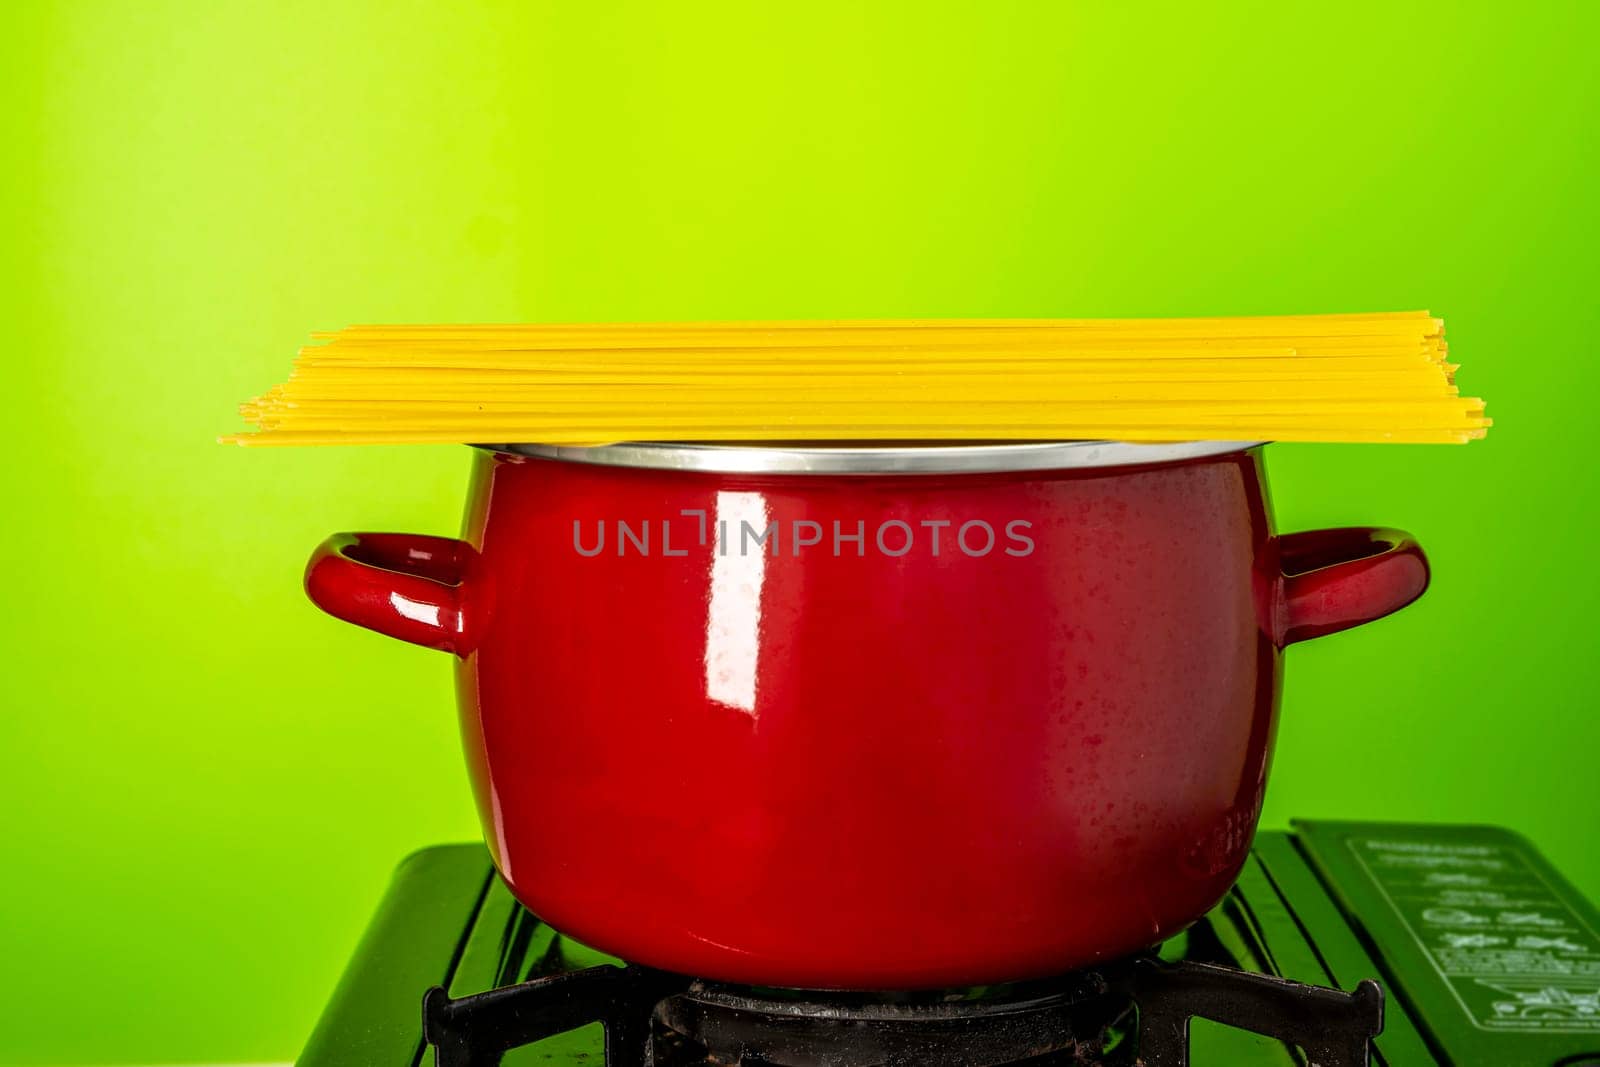 spaghetti in a saucepan. a beautiful red saucepan with spaghetti. cooking spaghetti in a saucepan on a gas stove. homemade Italian-style dinner. kitchen saucepan on a green background